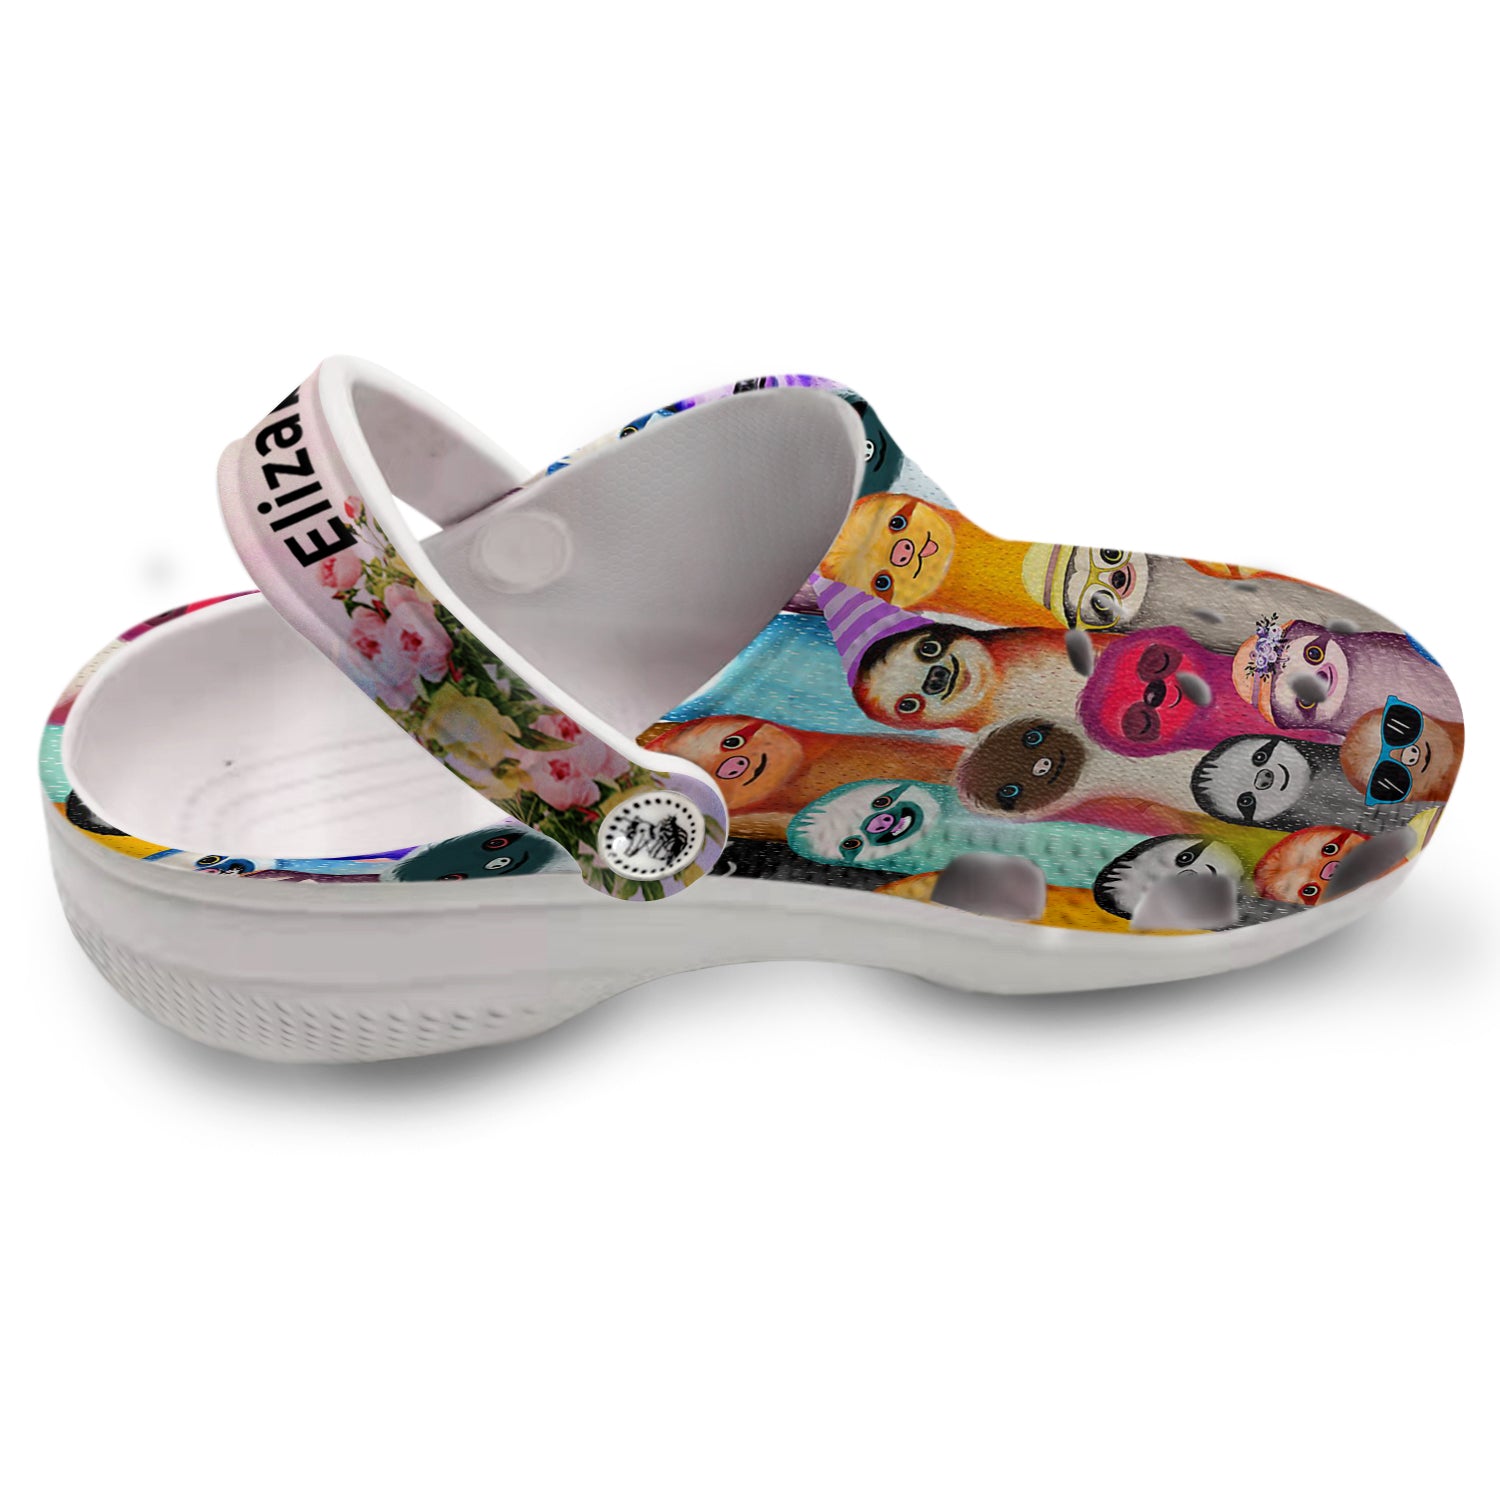 Colorful Sloth Personalized Clogs Shoes With Your Name, Sloth Clogs Shoes 3